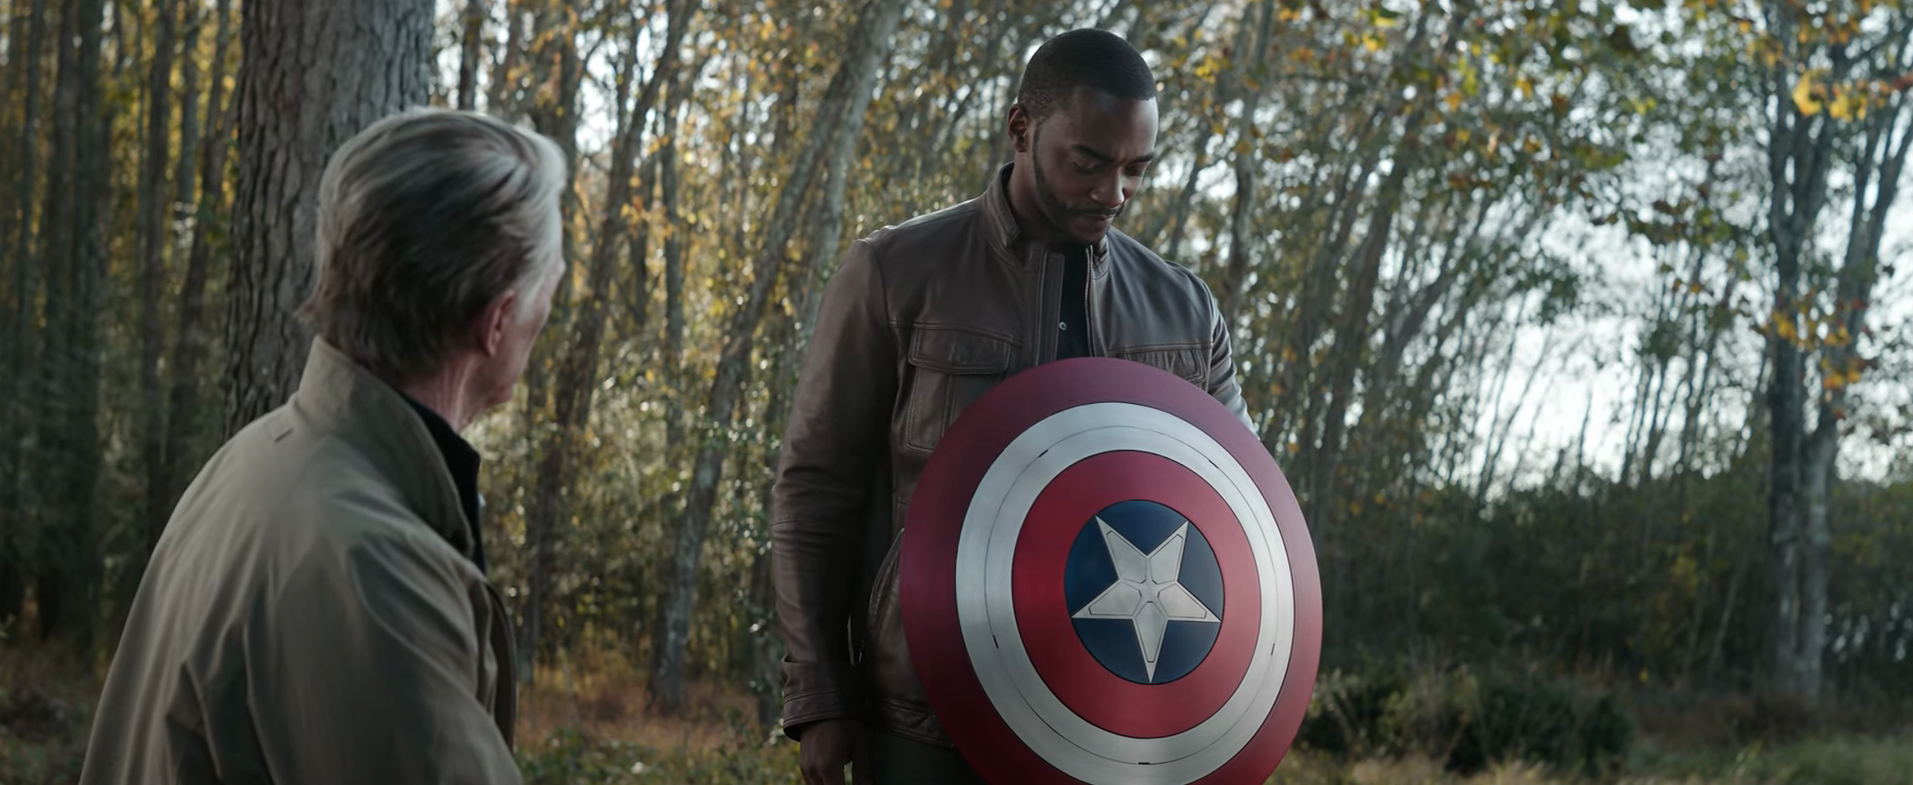 Avengers theory suggests Falcon has already been Captain America